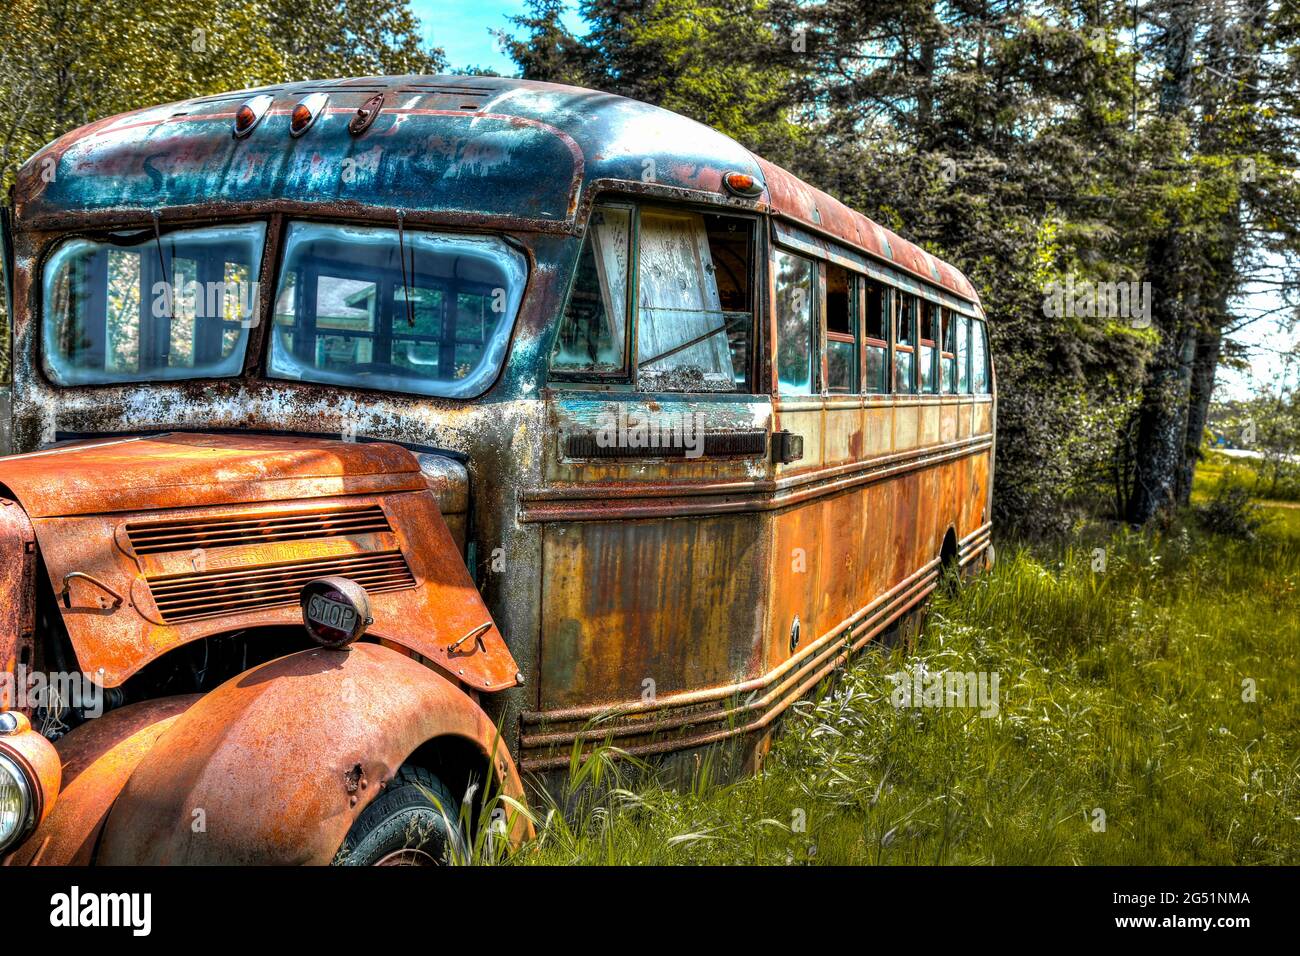 Abandoned old rusty bus on grass Stock Photo